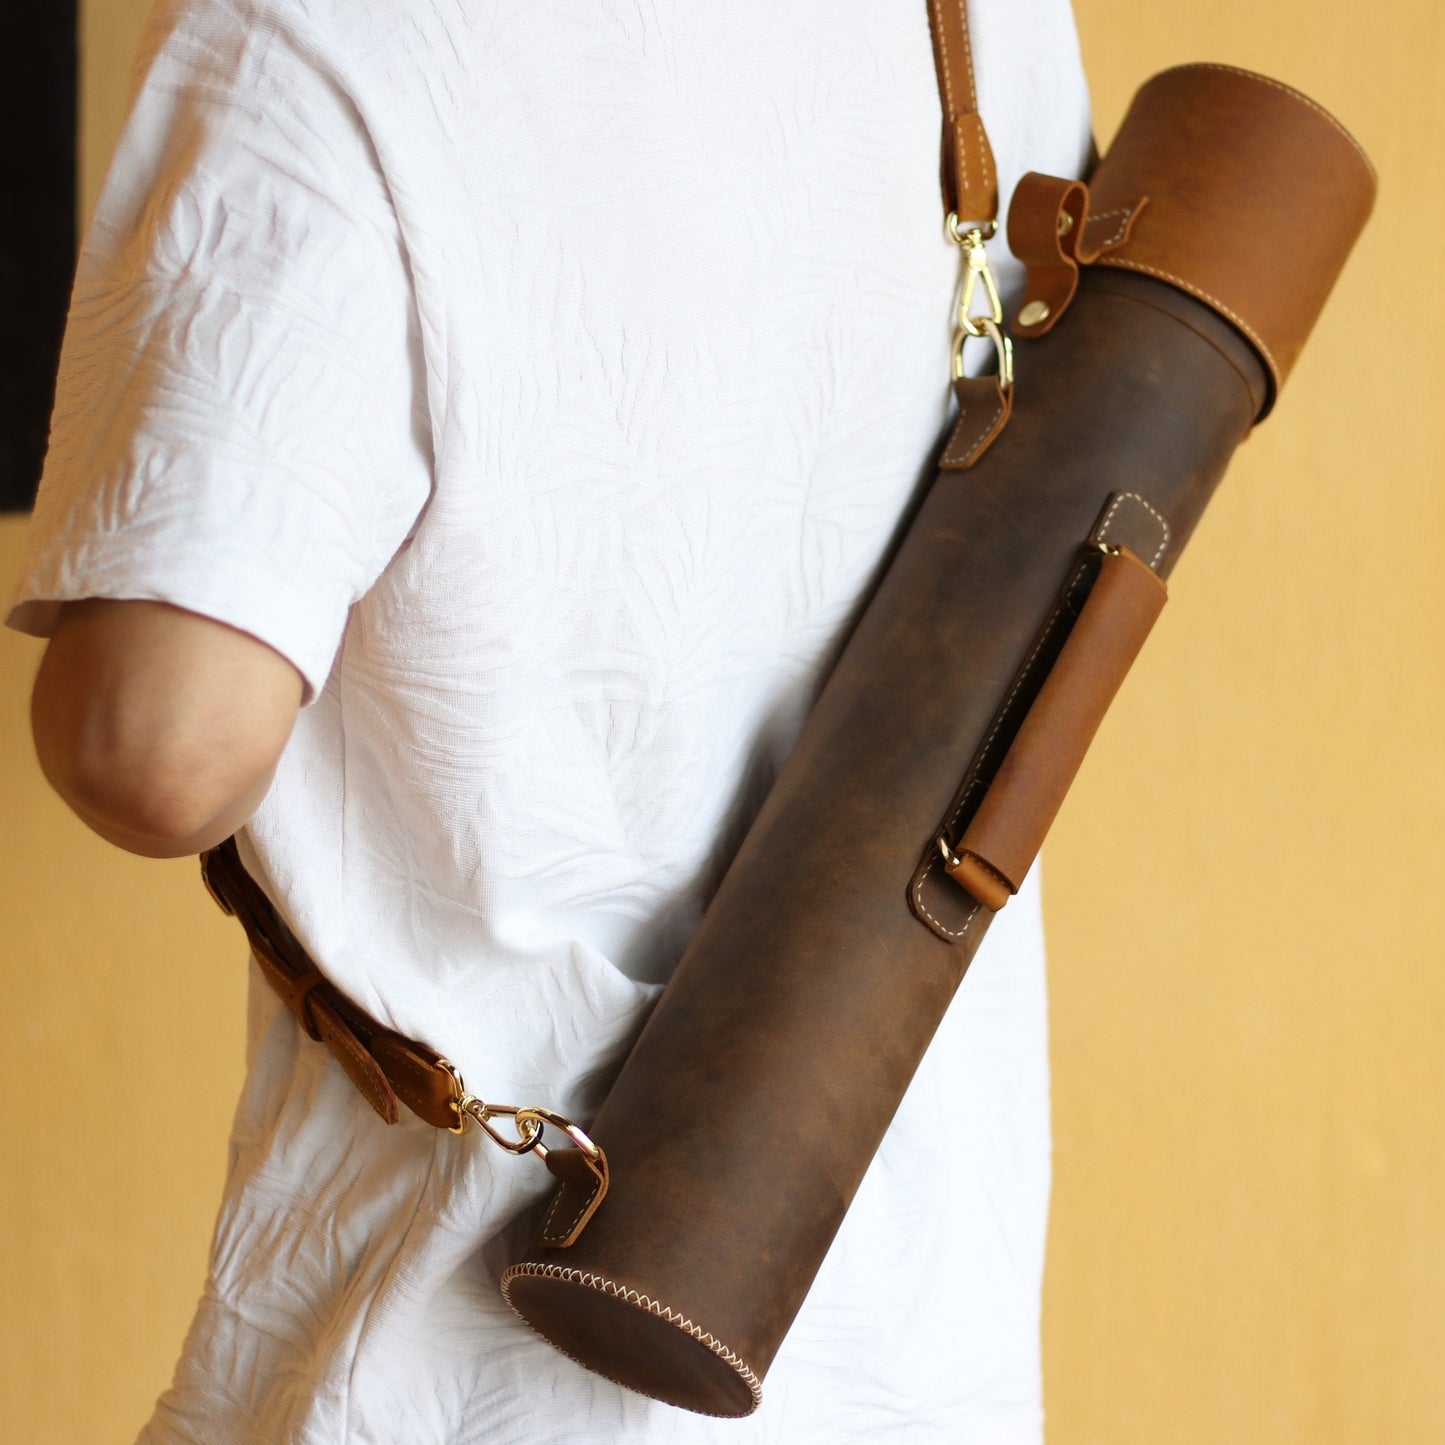 Leather Map Tube - Blueprint or Photography Carrying Case